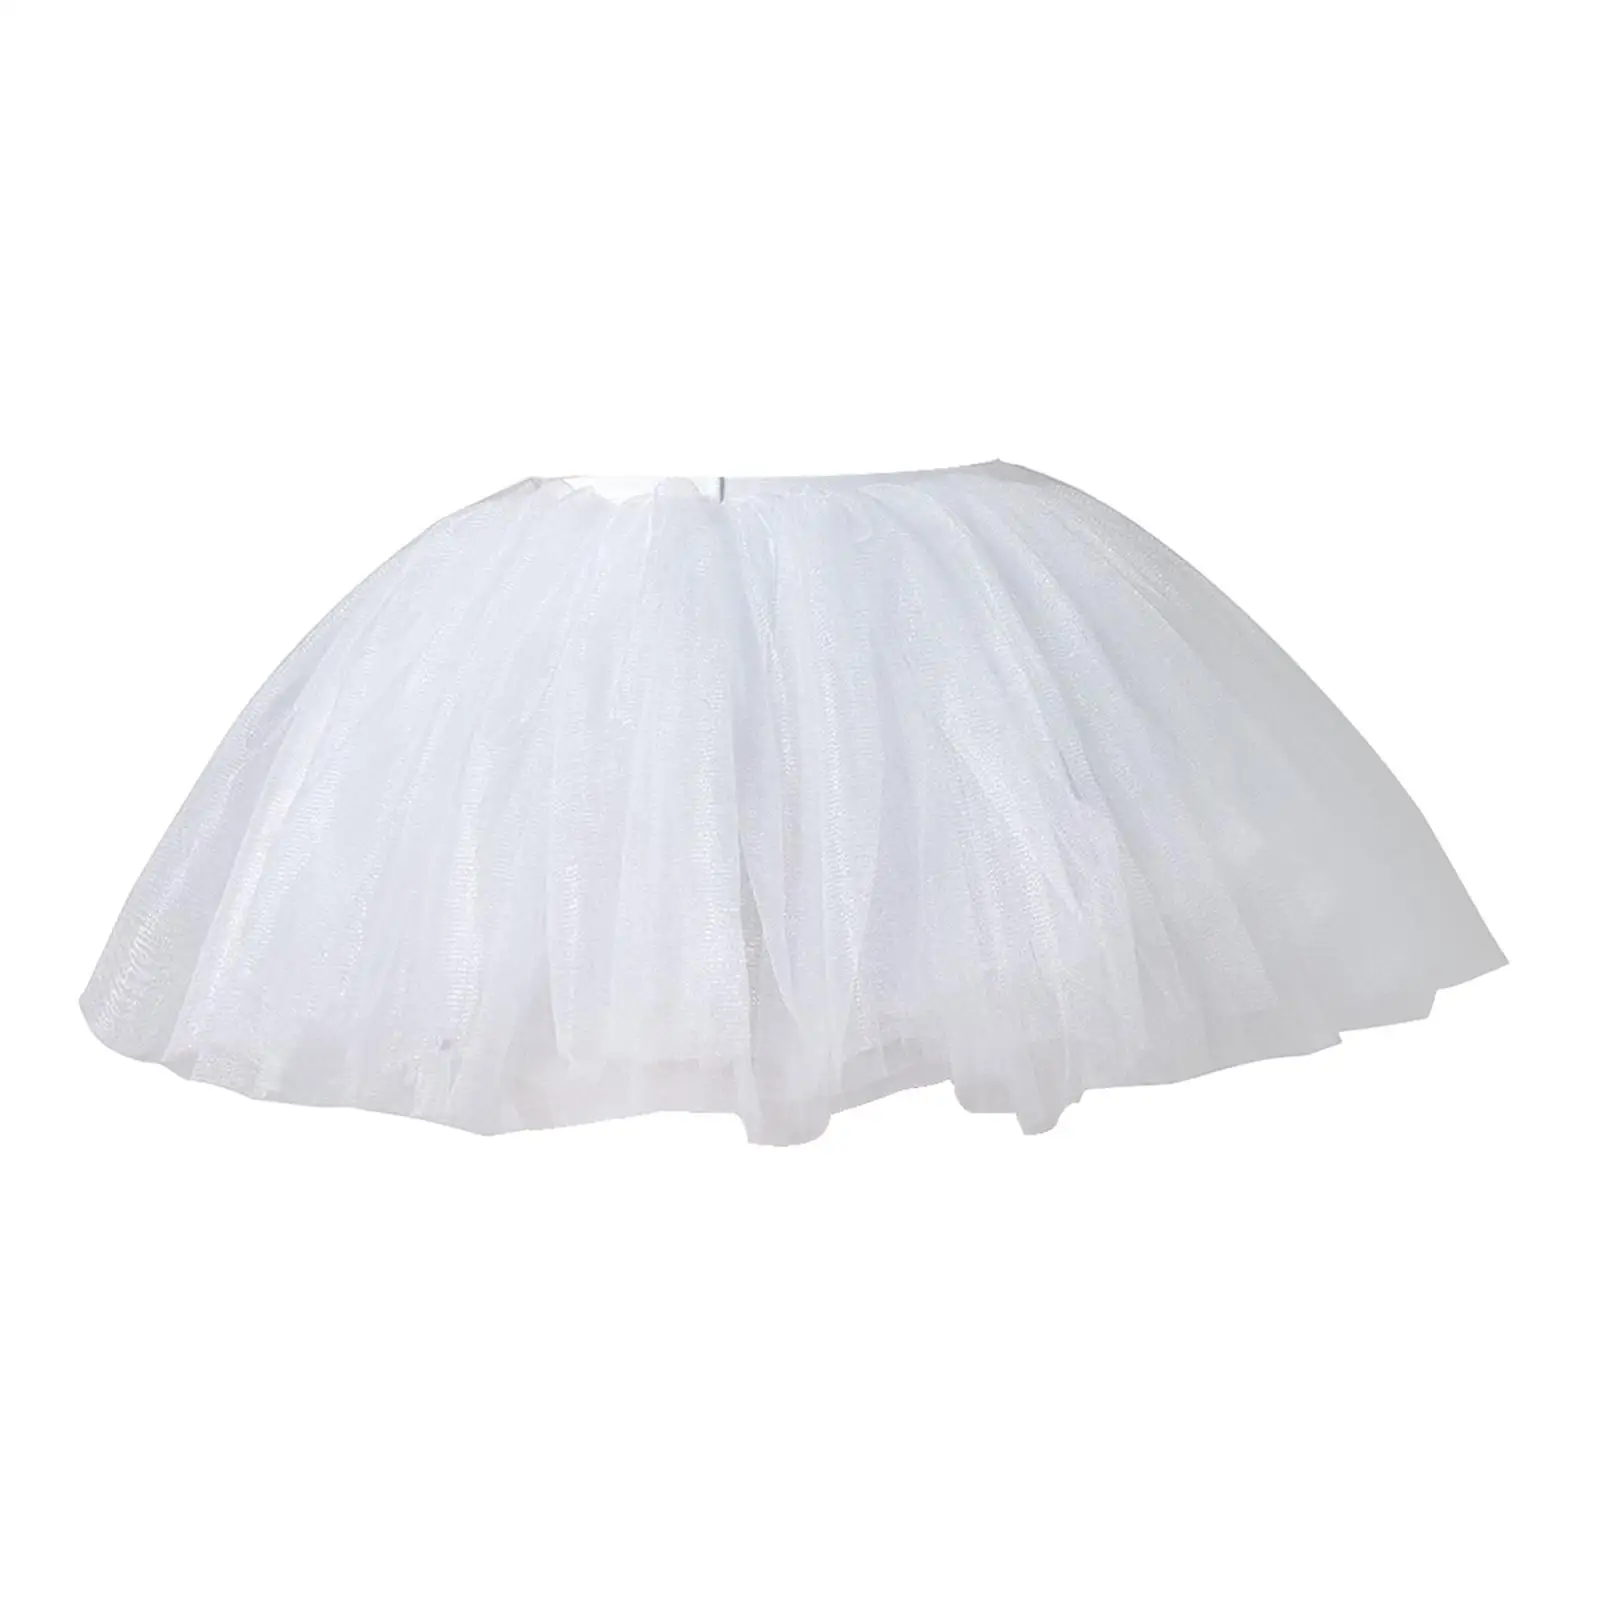 Women Tulle Tutu Skirt Cosplay Supplies Party Costume Adults Dress Tulle Petticoat for Beach Outfit Wedding Concert Performance